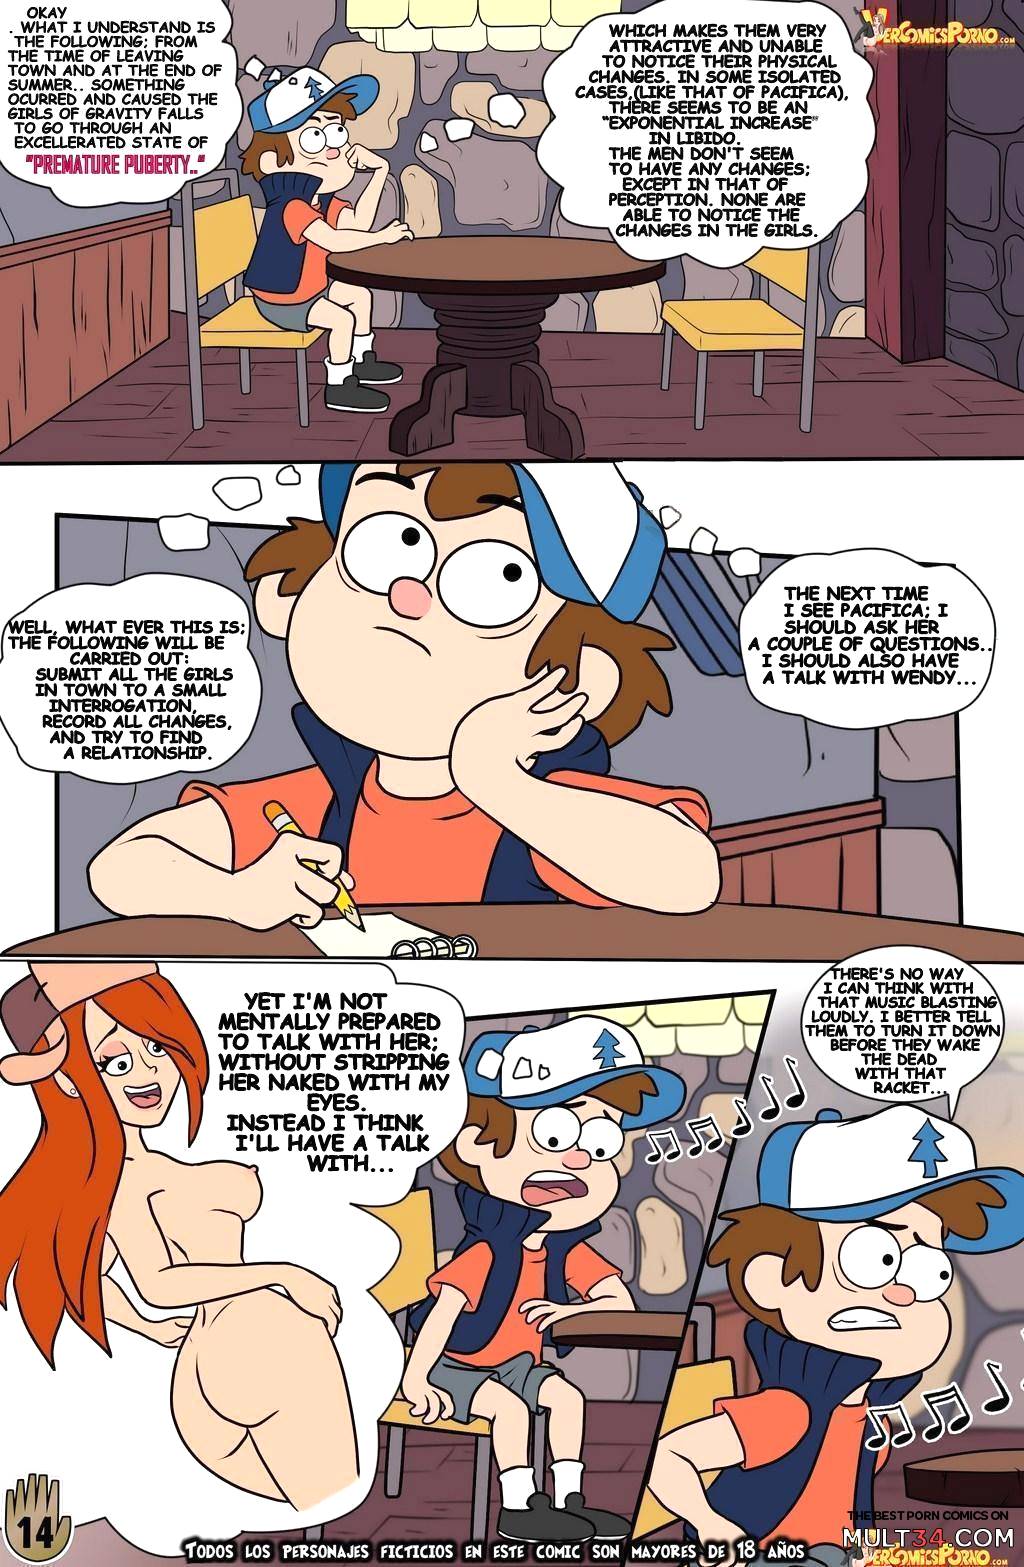 Gravity Falls - One Summer of Pleasure 2 page 15